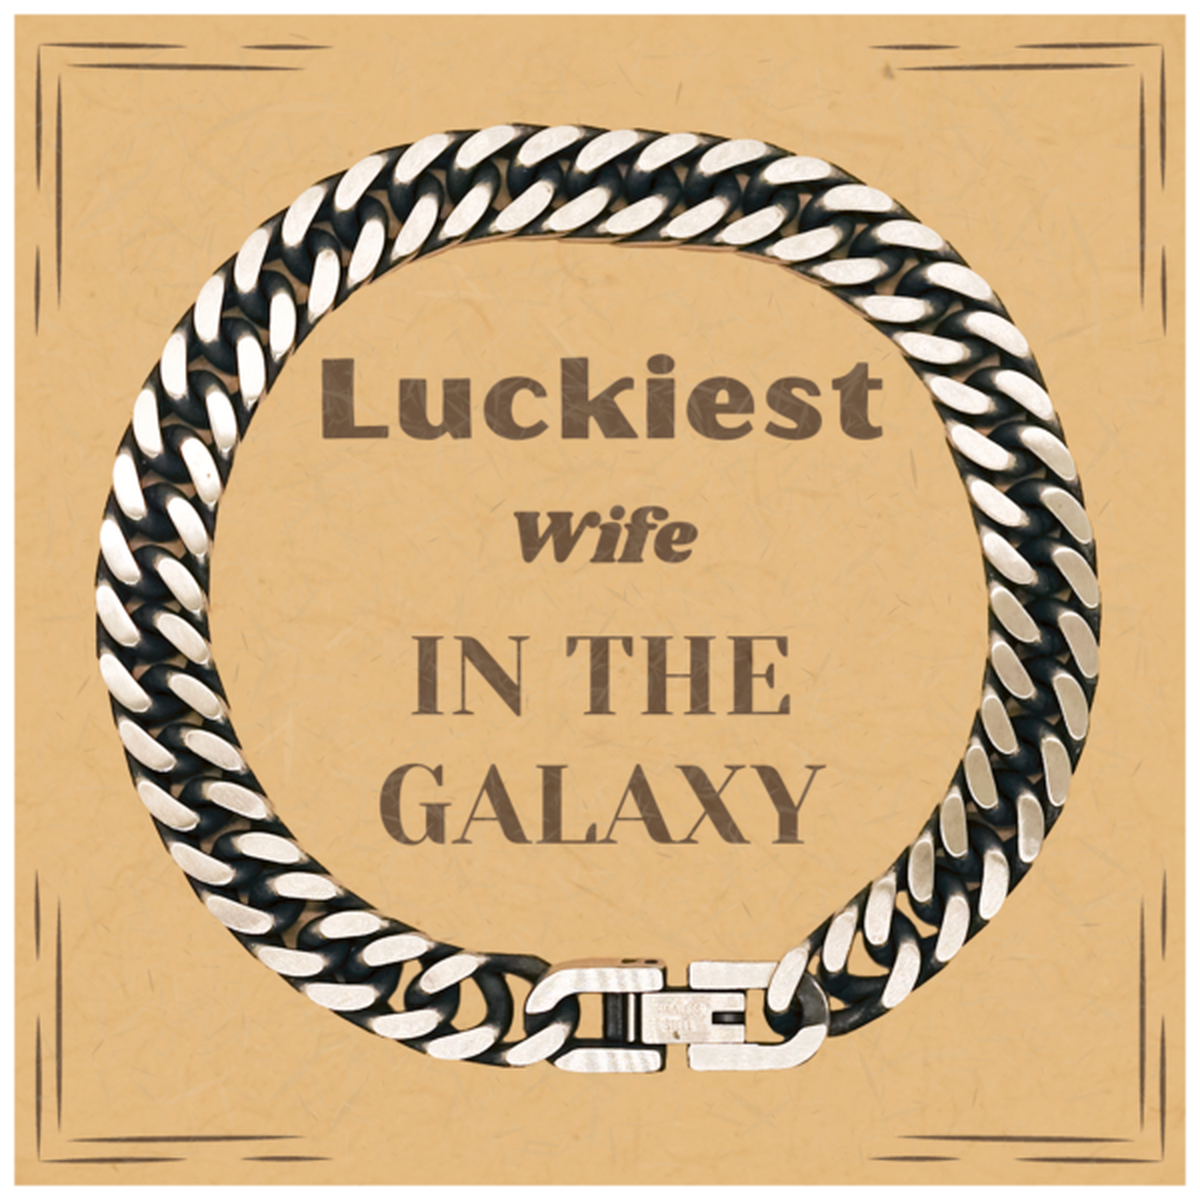 Luckiest Wife in the Galaxy, To My Wife Message Card Gifts, Christmas Wife Cuban Link Chain Bracelet Gifts, X-mas Birthday Unique Gifts For Wife Men Women